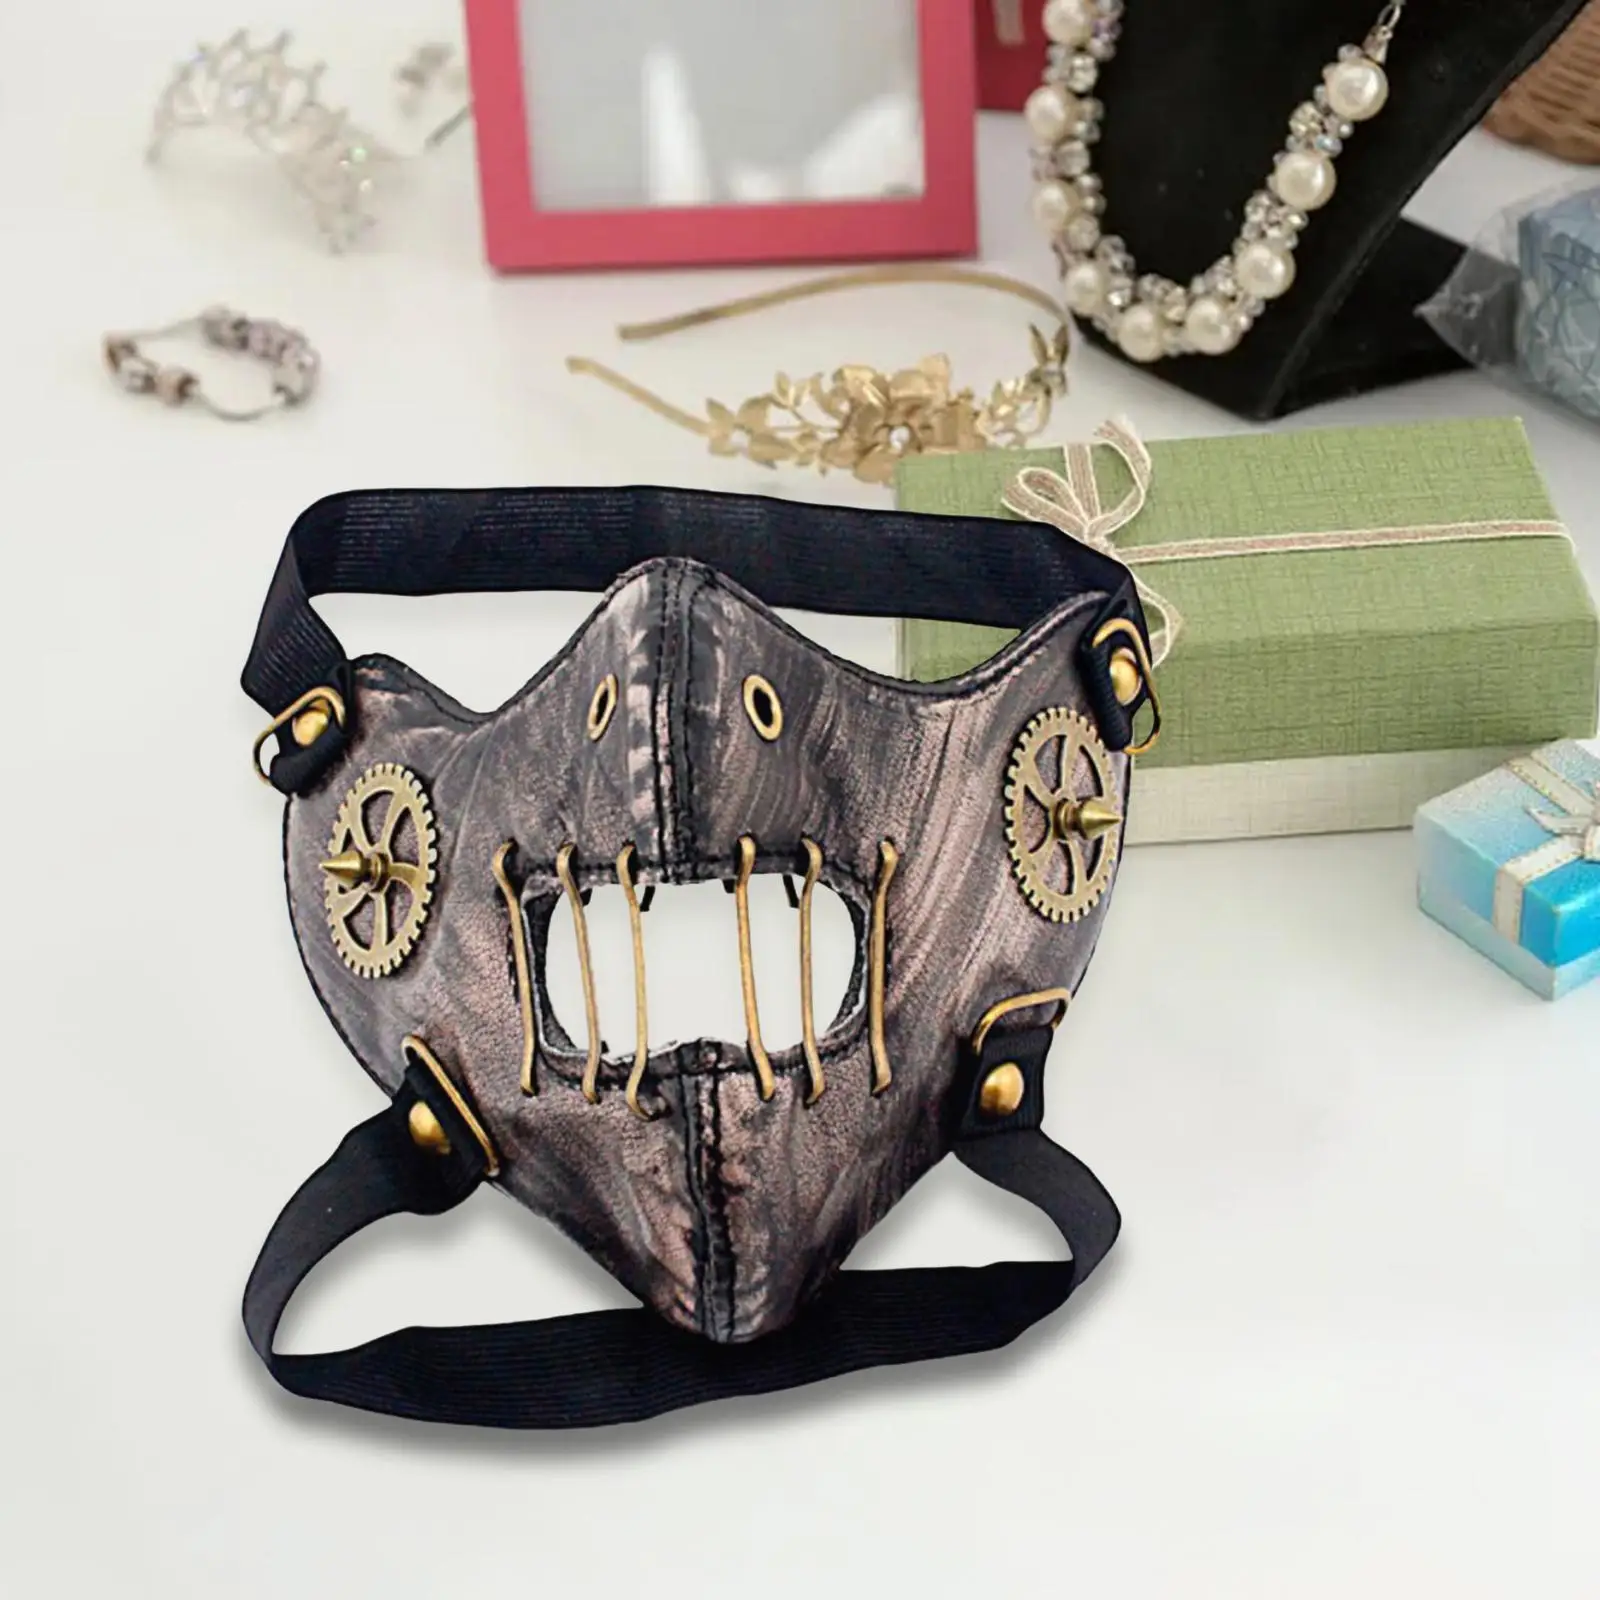 

Punk PU Leather Mask Fashion Cosplay Accessory Dustproof Party Mask Punk Gear Rivet Mask for Party Carnival Halloween Masquerade